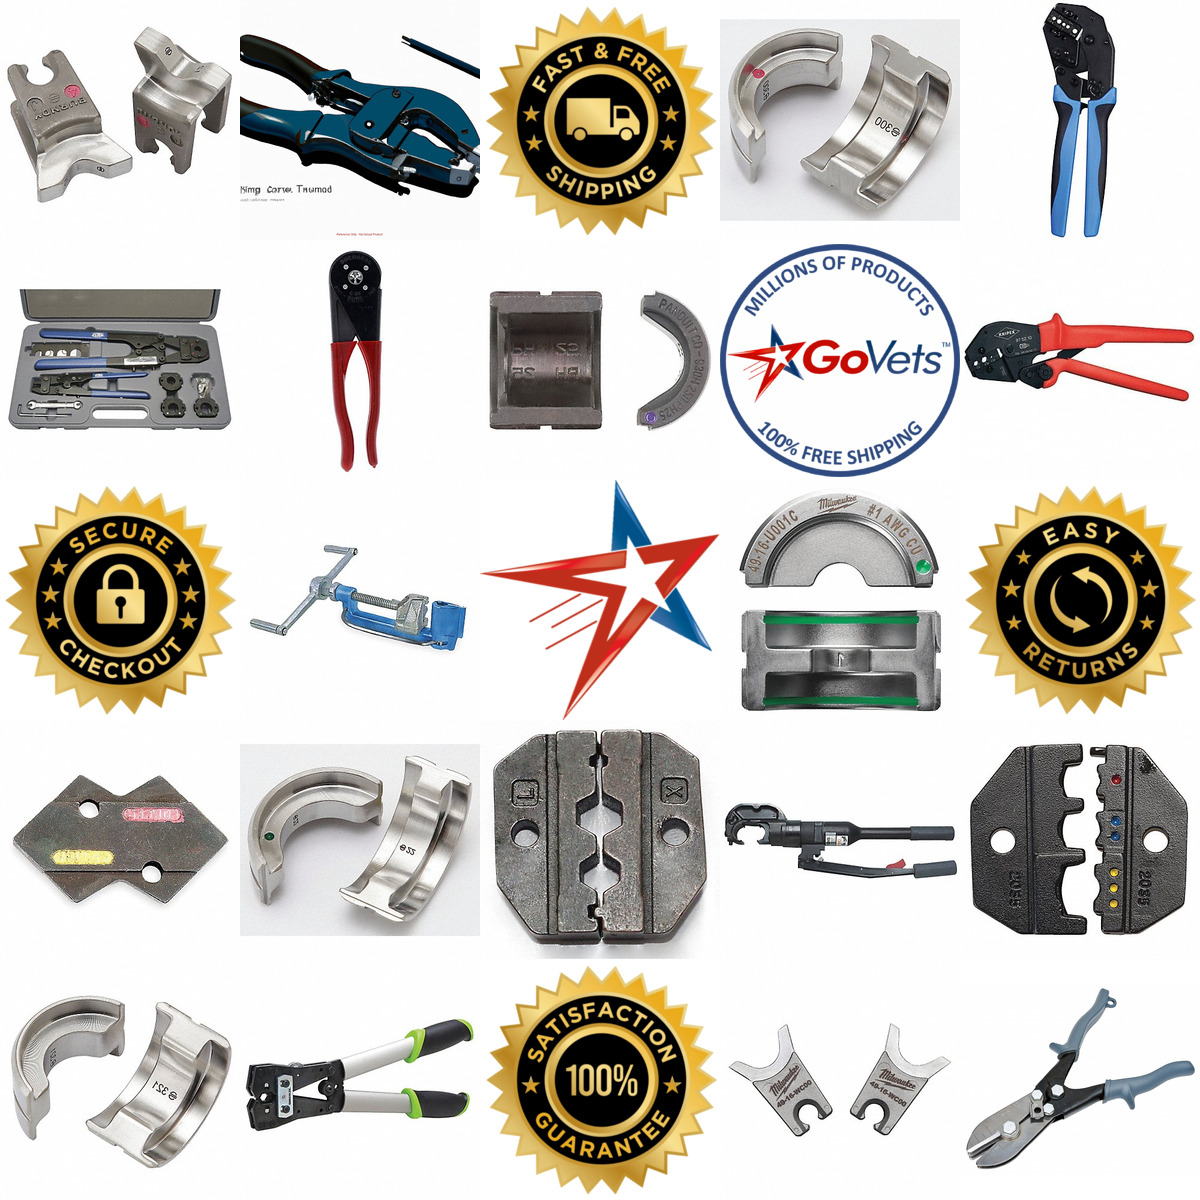 A selection of Crimping Tools products on GoVets